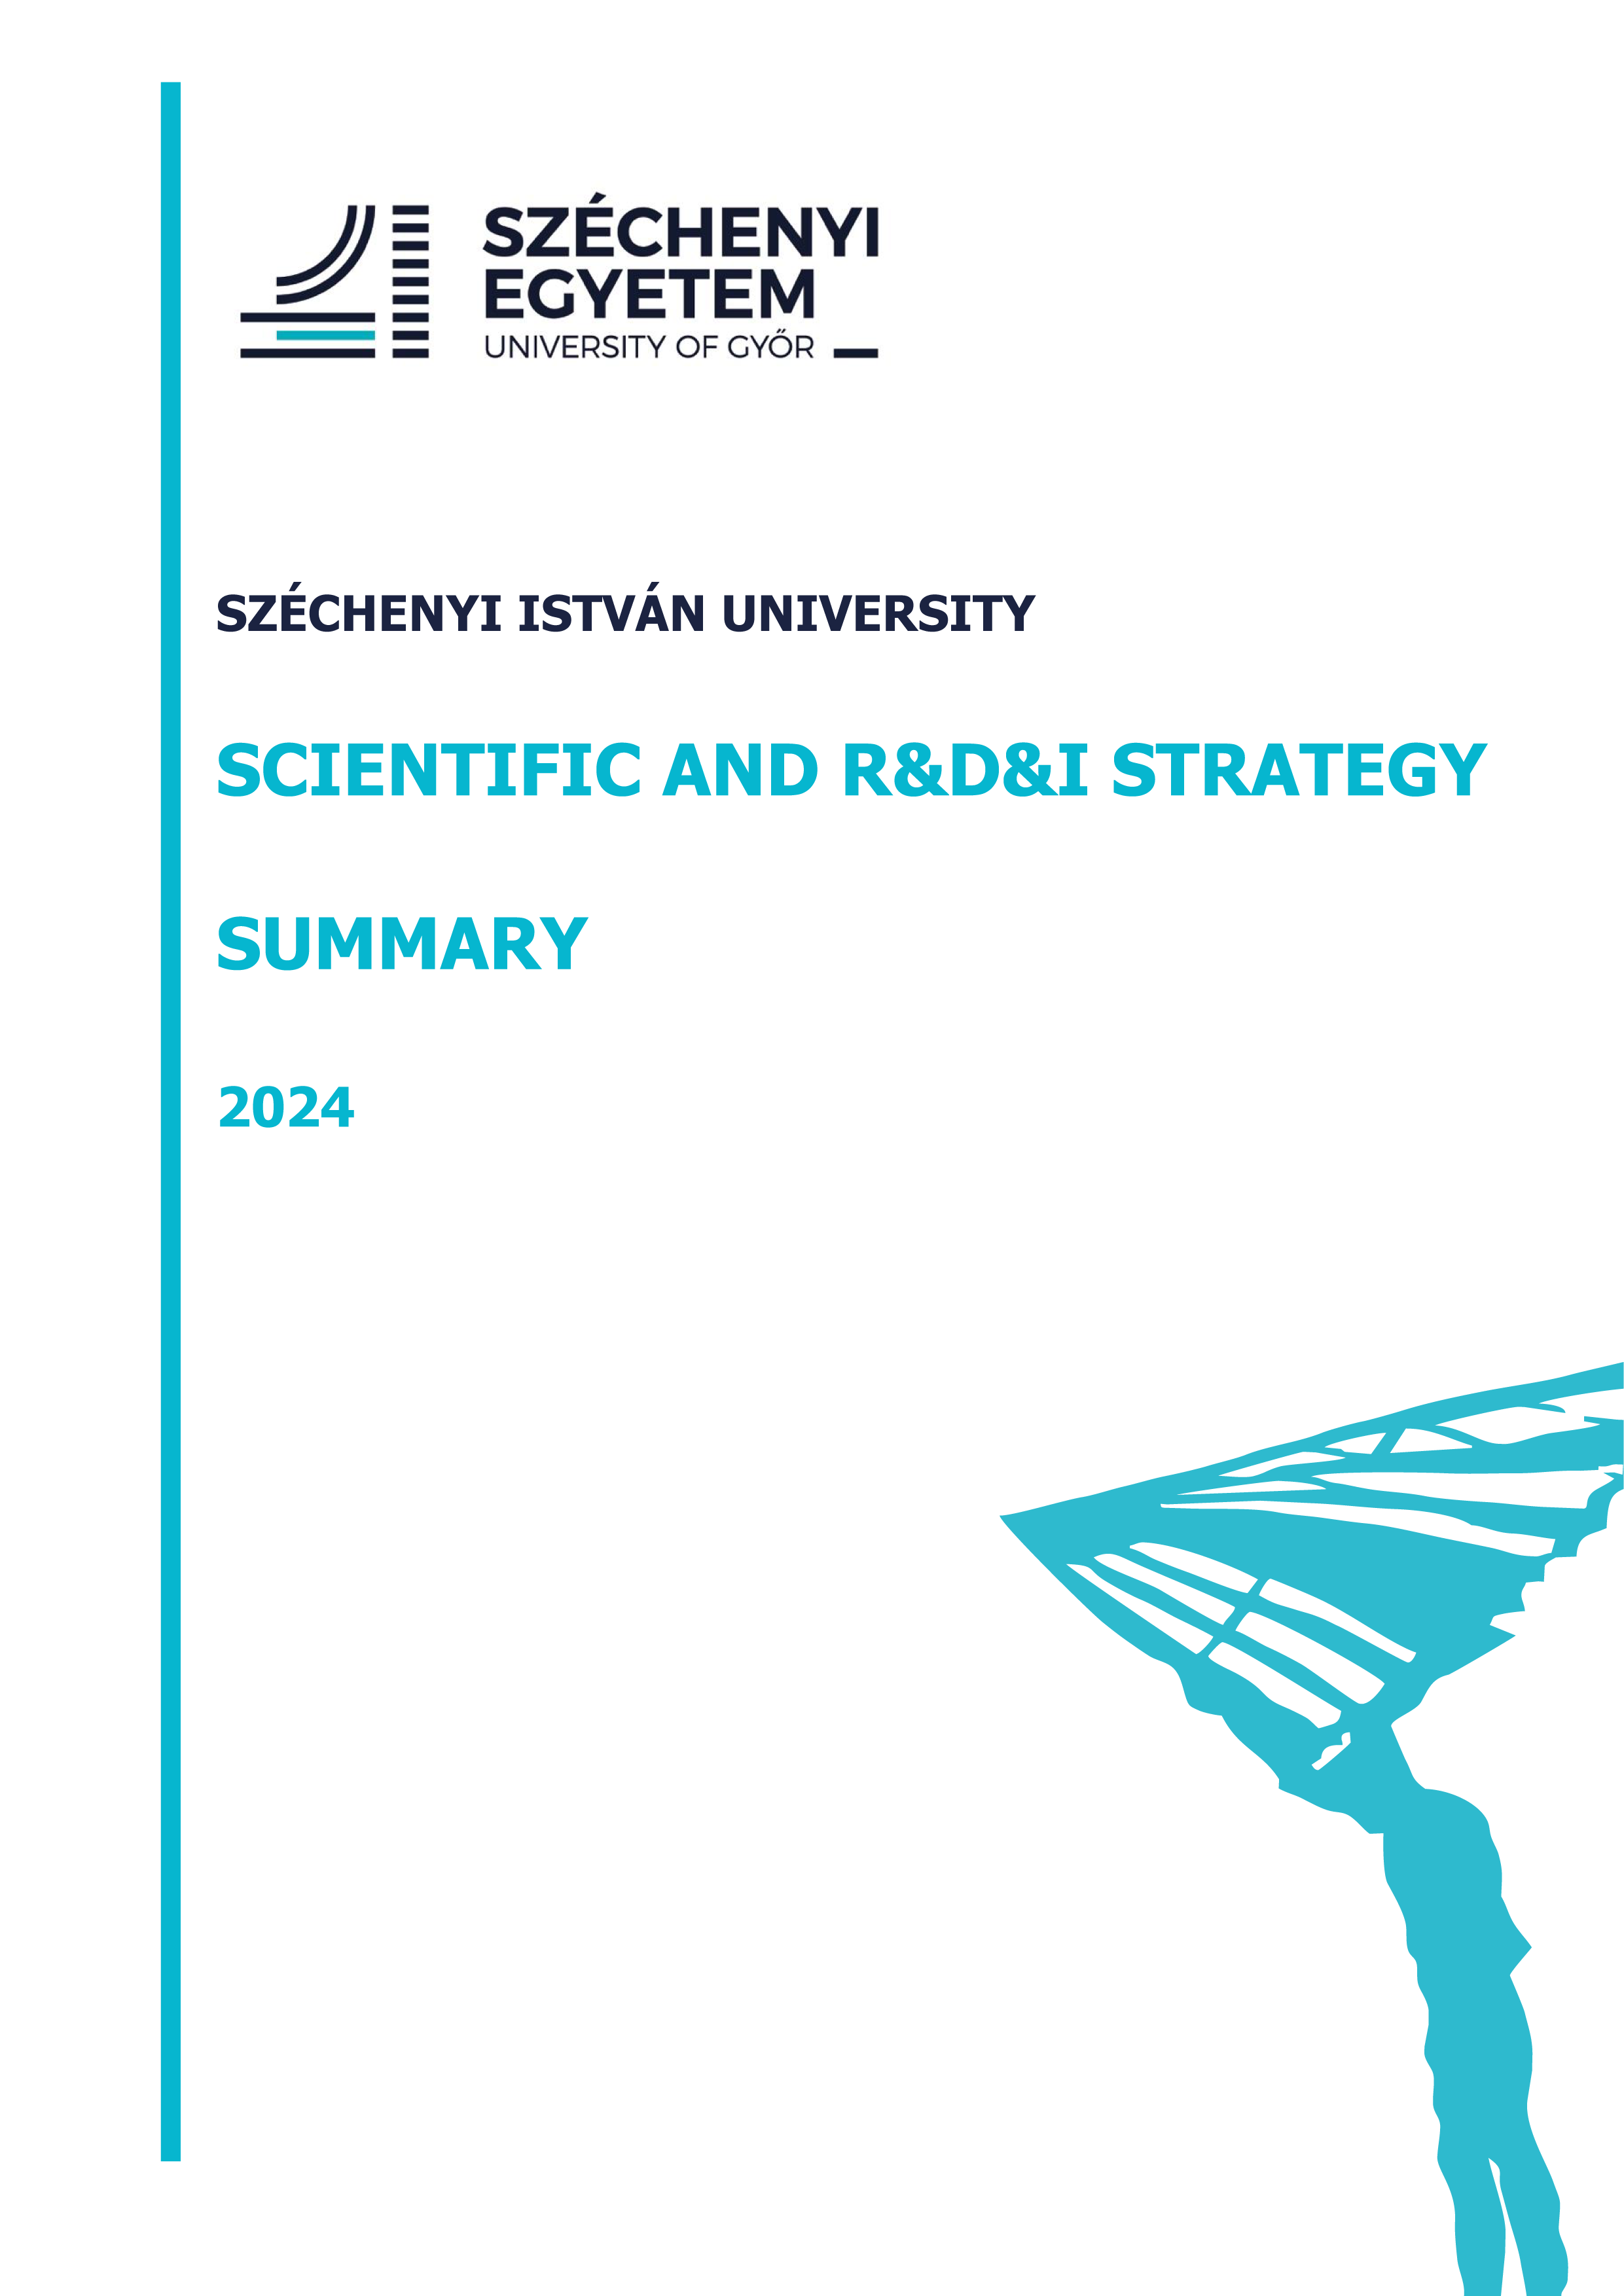 SZE_SCIENTIFIC AND RDI STRATEGY-01.png